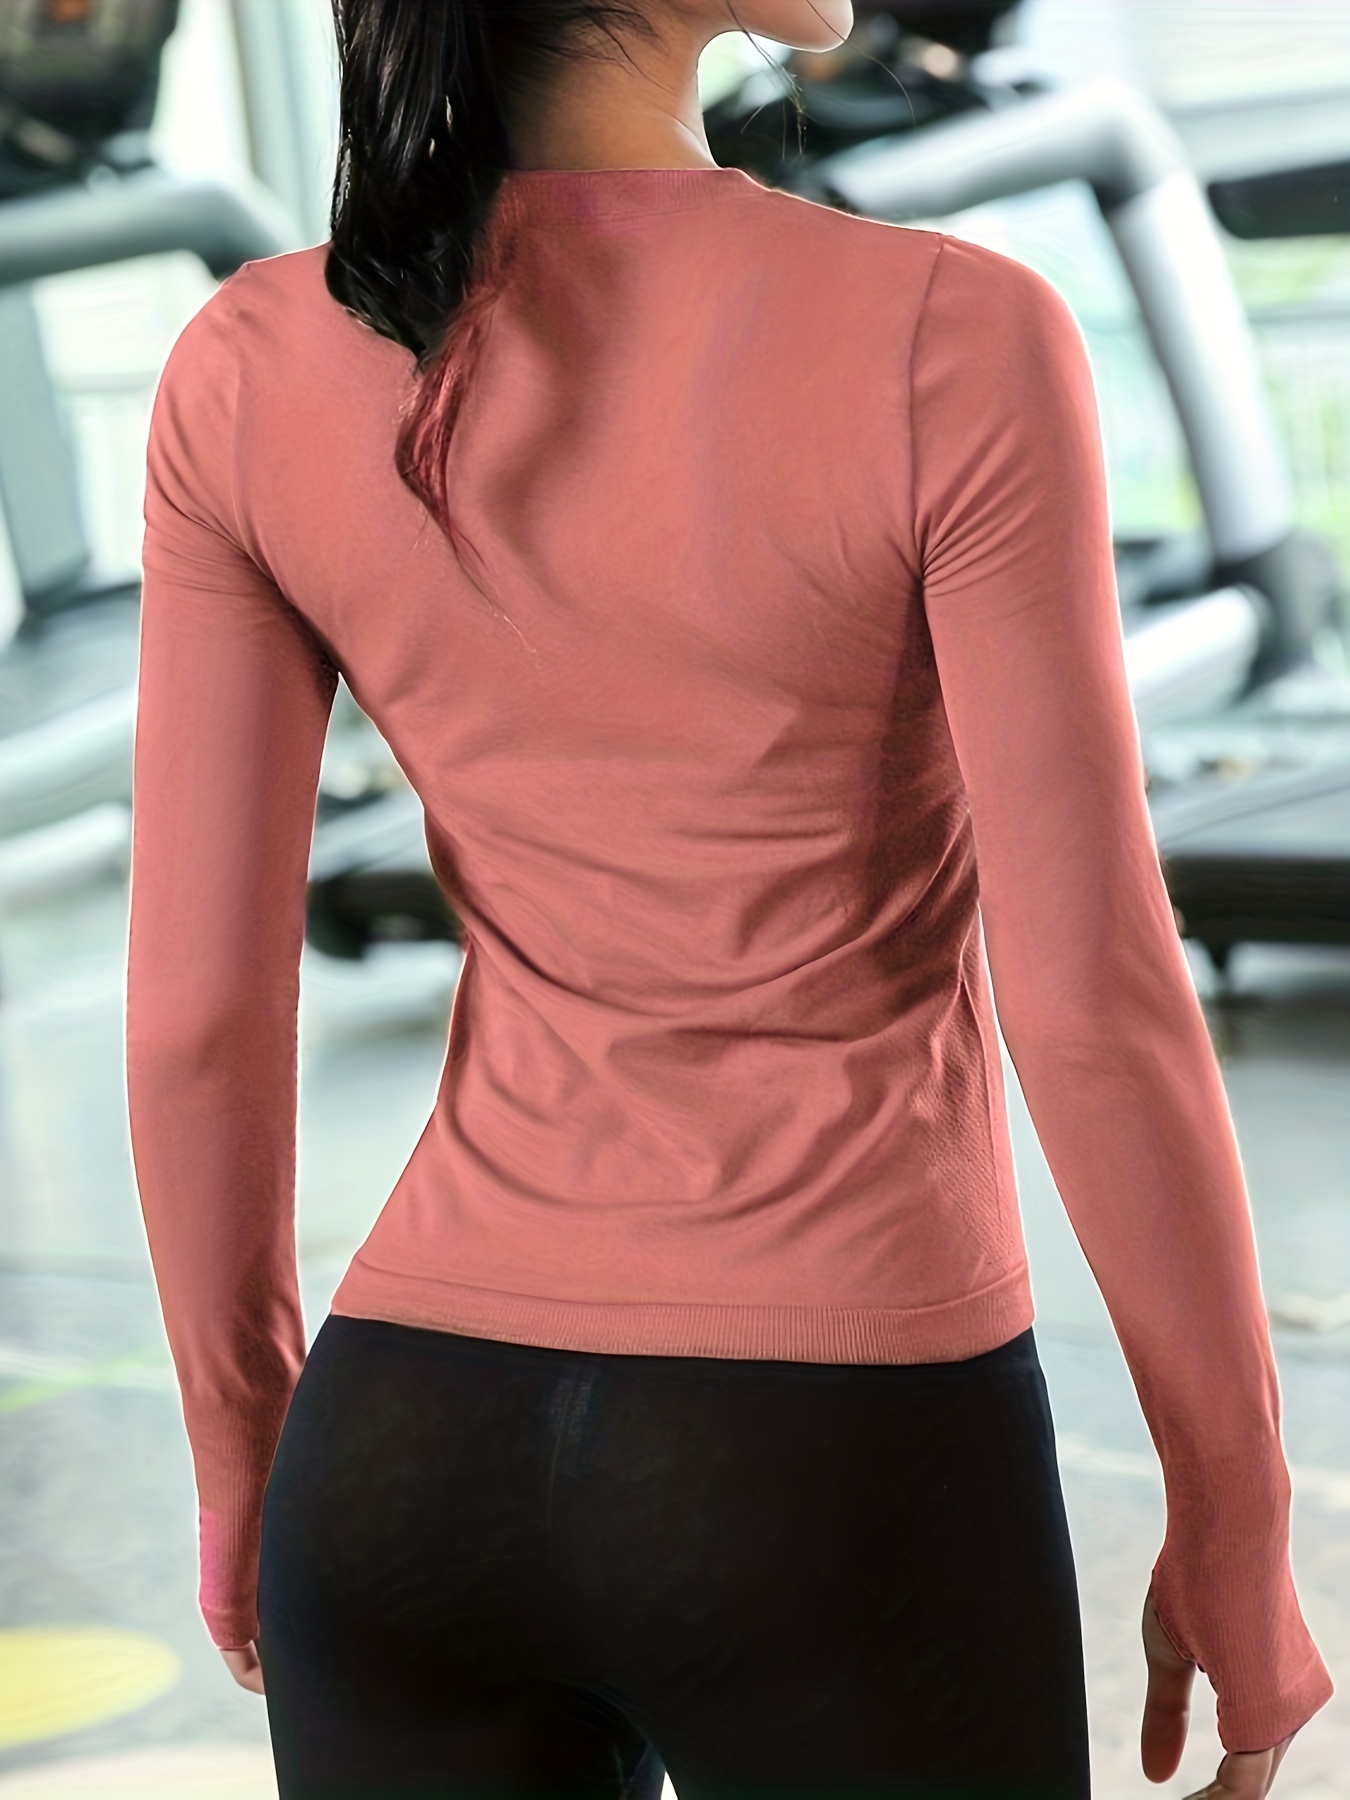 Yoga clothes gyms exercises tops women's slim fitness top tight-fitting  beauty back sports long-sleeved T-shirt